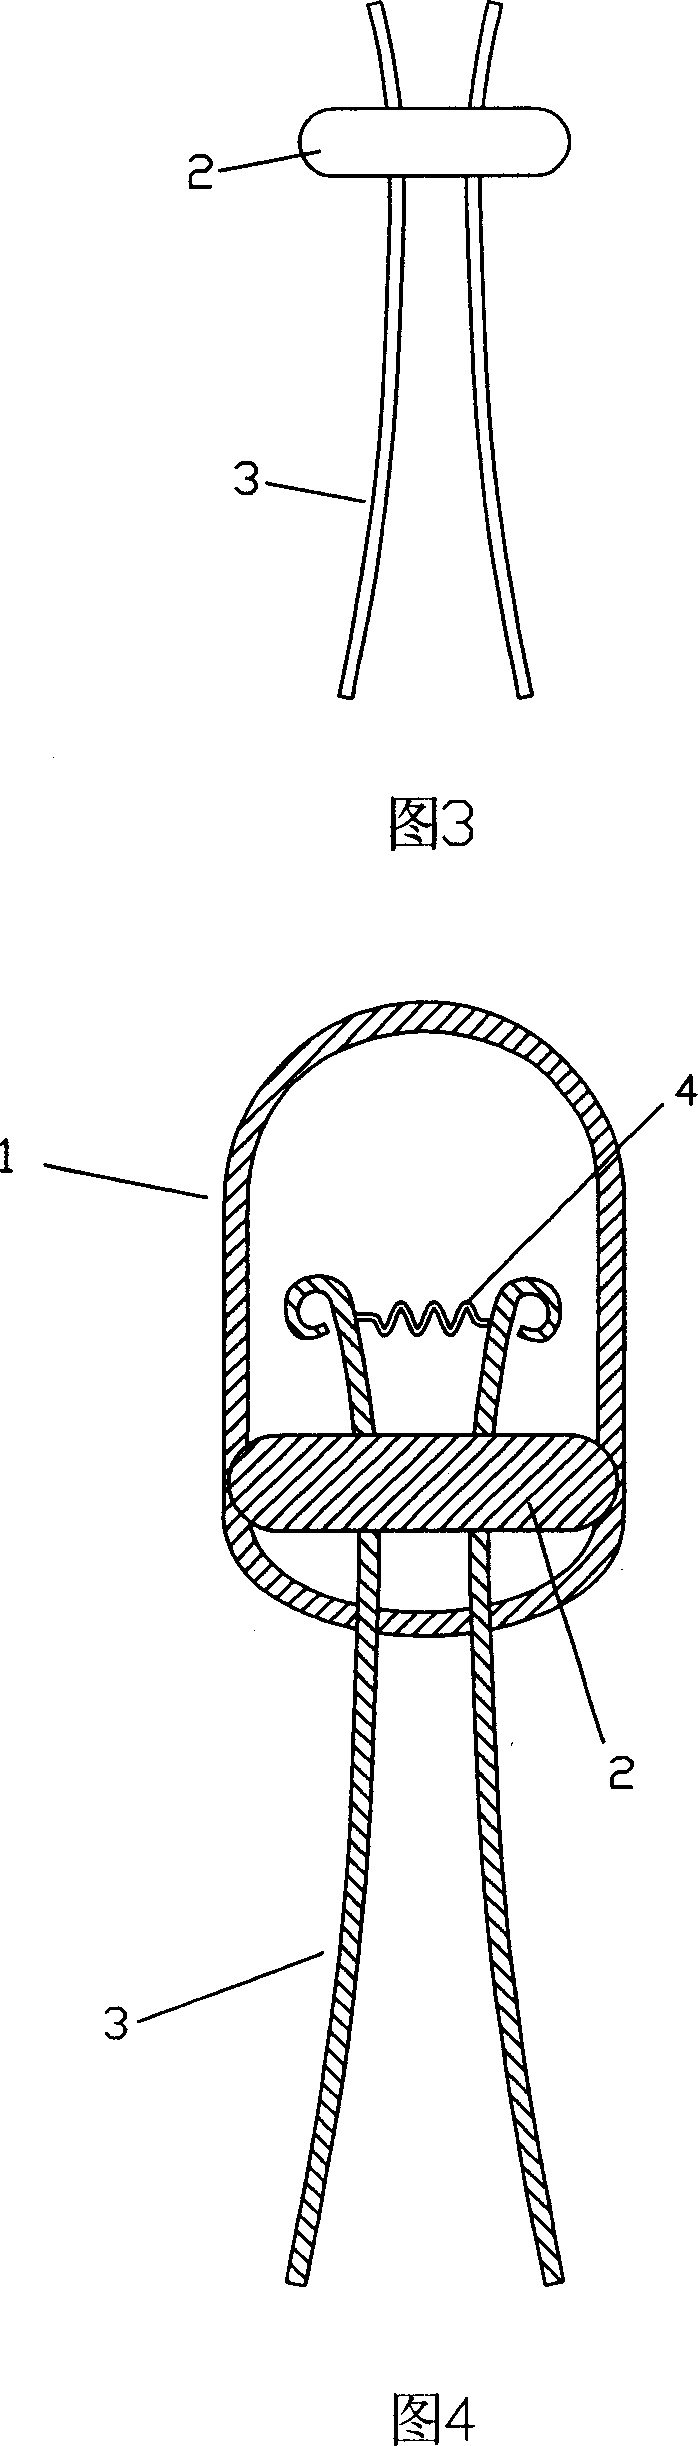 Environment-friendly type lamp and method of manufacturing